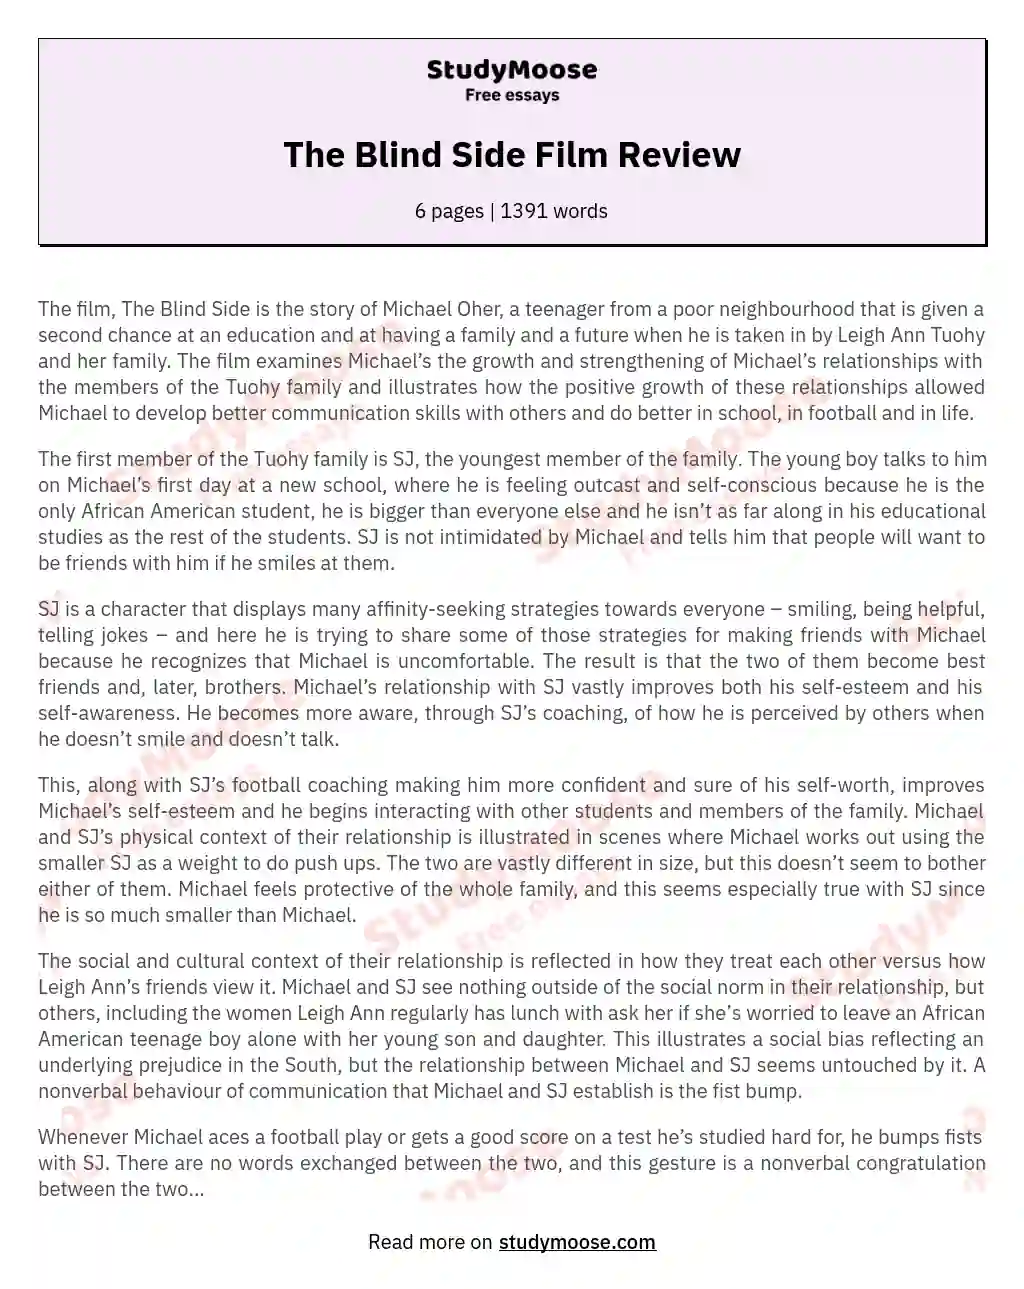 The Blind Side Film Review